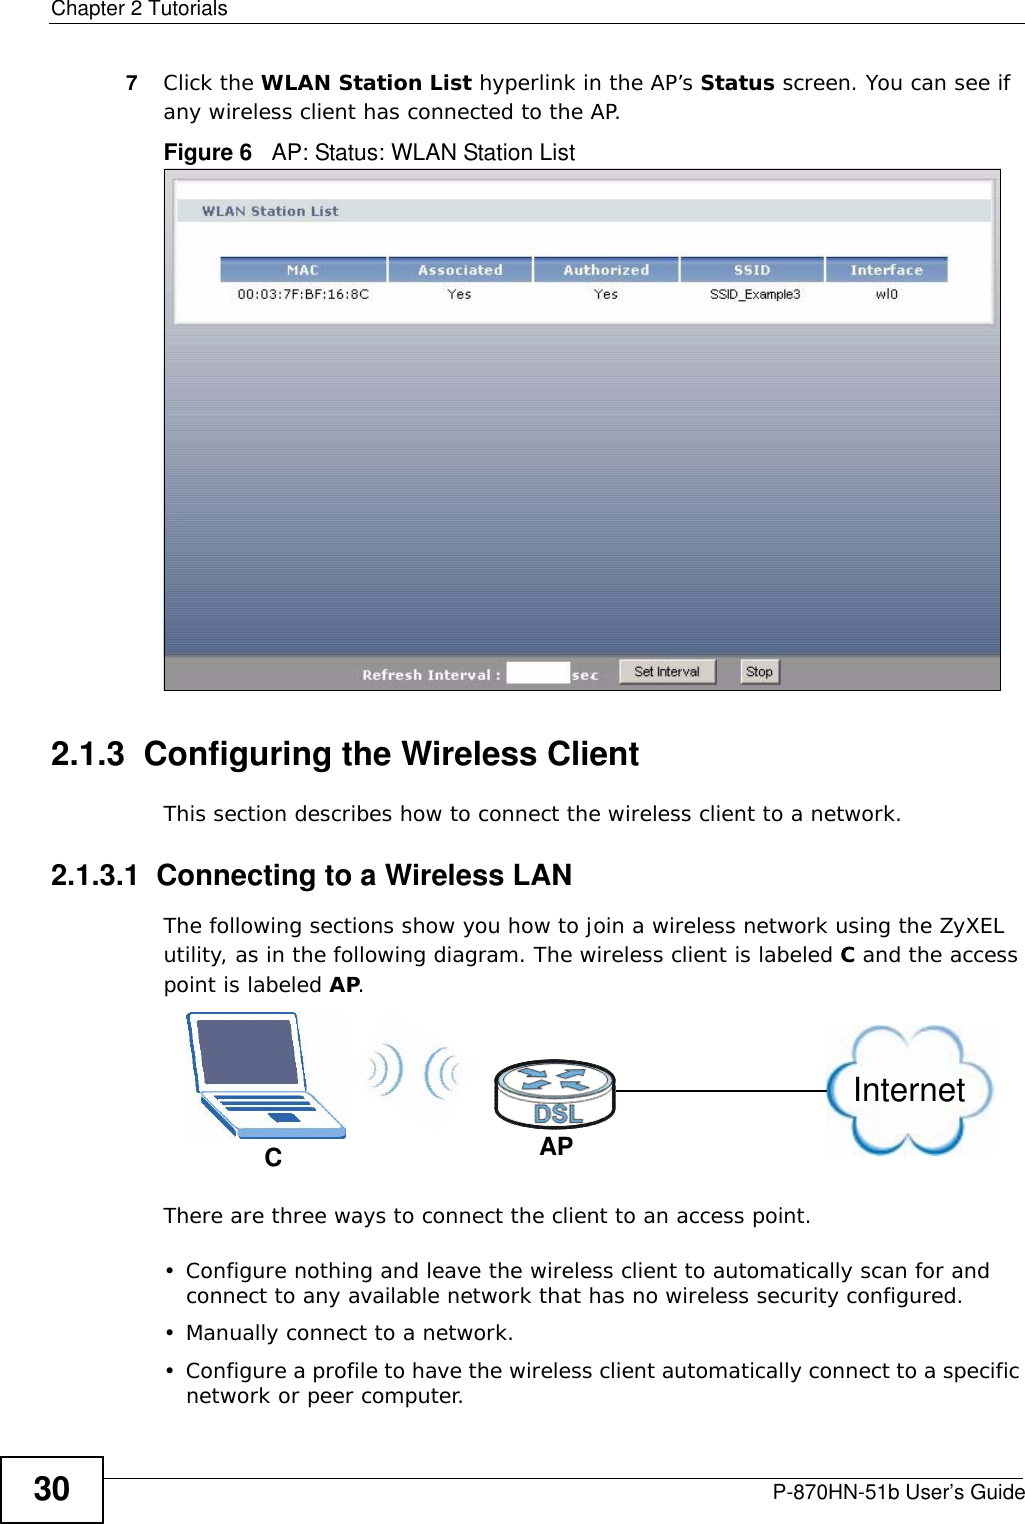 Chapter 2 TutorialsP-870HN-51b User’s Guide307Click the WLAN Station List hyperlink in the AP’s Status screen. You can see if any wireless client has connected to the AP.Figure 6   AP: Status: WLAN Station List 2.1.3  Configuring the Wireless ClientThis section describes how to connect the wireless client to a network.2.1.3.1  Connecting to a Wireless LANThe following sections show you how to join a wireless network using the ZyXEL utility, as in the following diagram. The wireless client is labeled C and the access point is labeled AP.There are three ways to connect the client to an access point.• Configure nothing and leave the wireless client to automatically scan for and connect to any available network that has no wireless security configured.• Manually connect to a network.• Configure a profile to have the wireless client automatically connect to a specific network or peer computer. CAPInternet